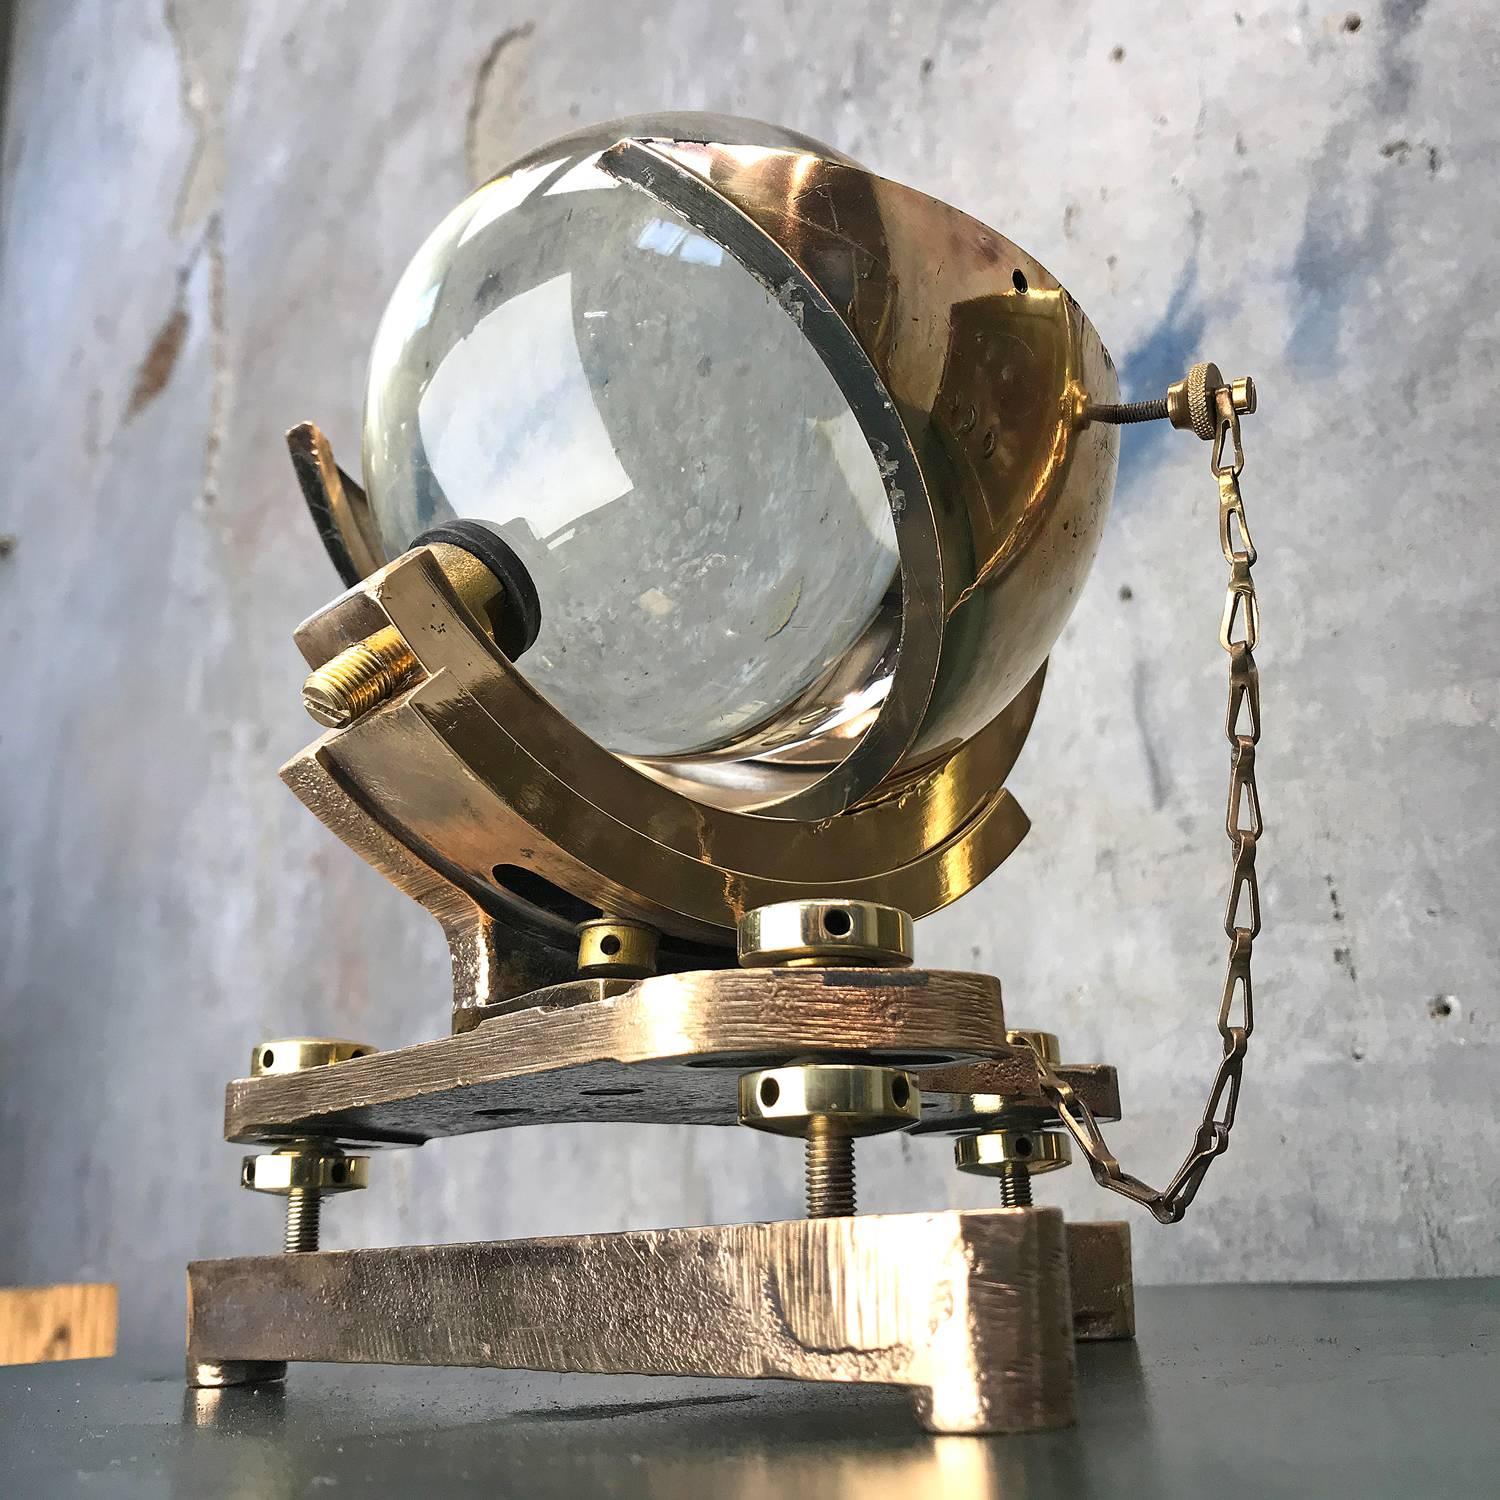 The Campbell–Stokes recorder (sometimes called a Stokes sphere) is a kind of sunshine recorder. It was invented by John Francis Campbell in 1853 and modified in 1879 by Sir George Gabriel Stokes. The original design by Campbell consisted of a glass